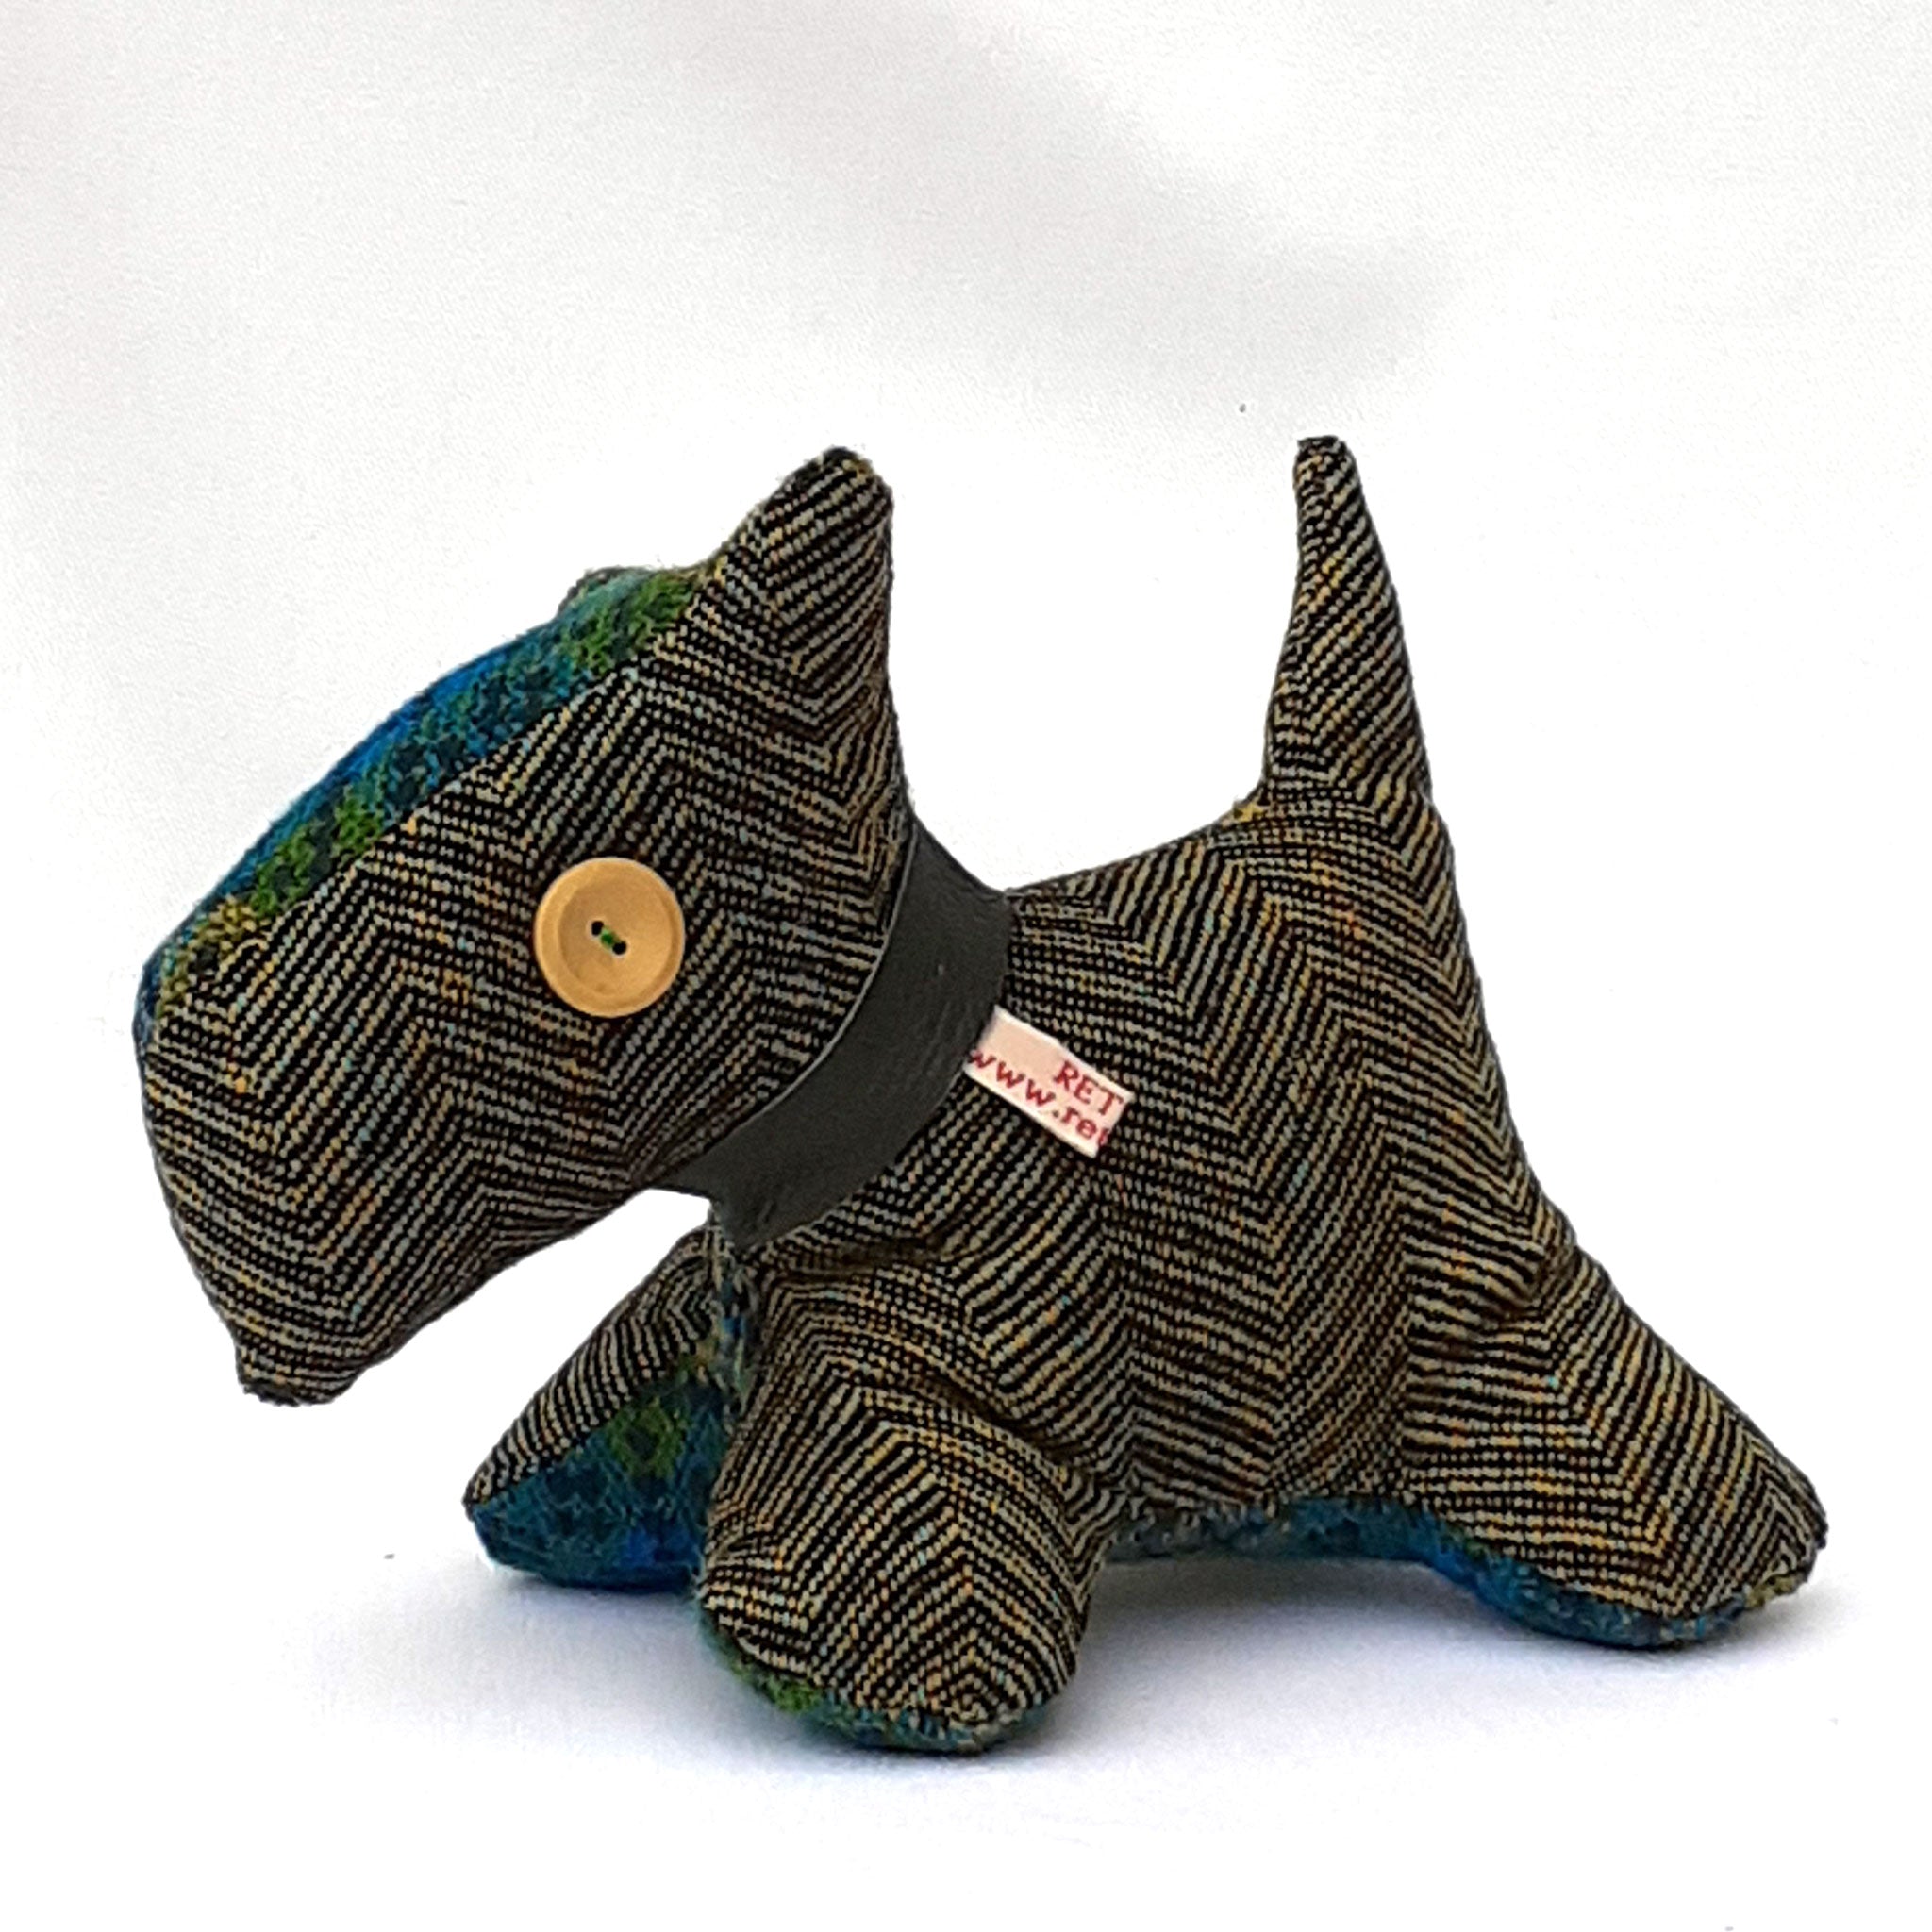 Close up of handmade tweed fabric Scottie dog.  Made from brown chevron tweed with bright blue and green tweed accent head and stomach panels.. ReTweed label on collar, and a beige button eye.